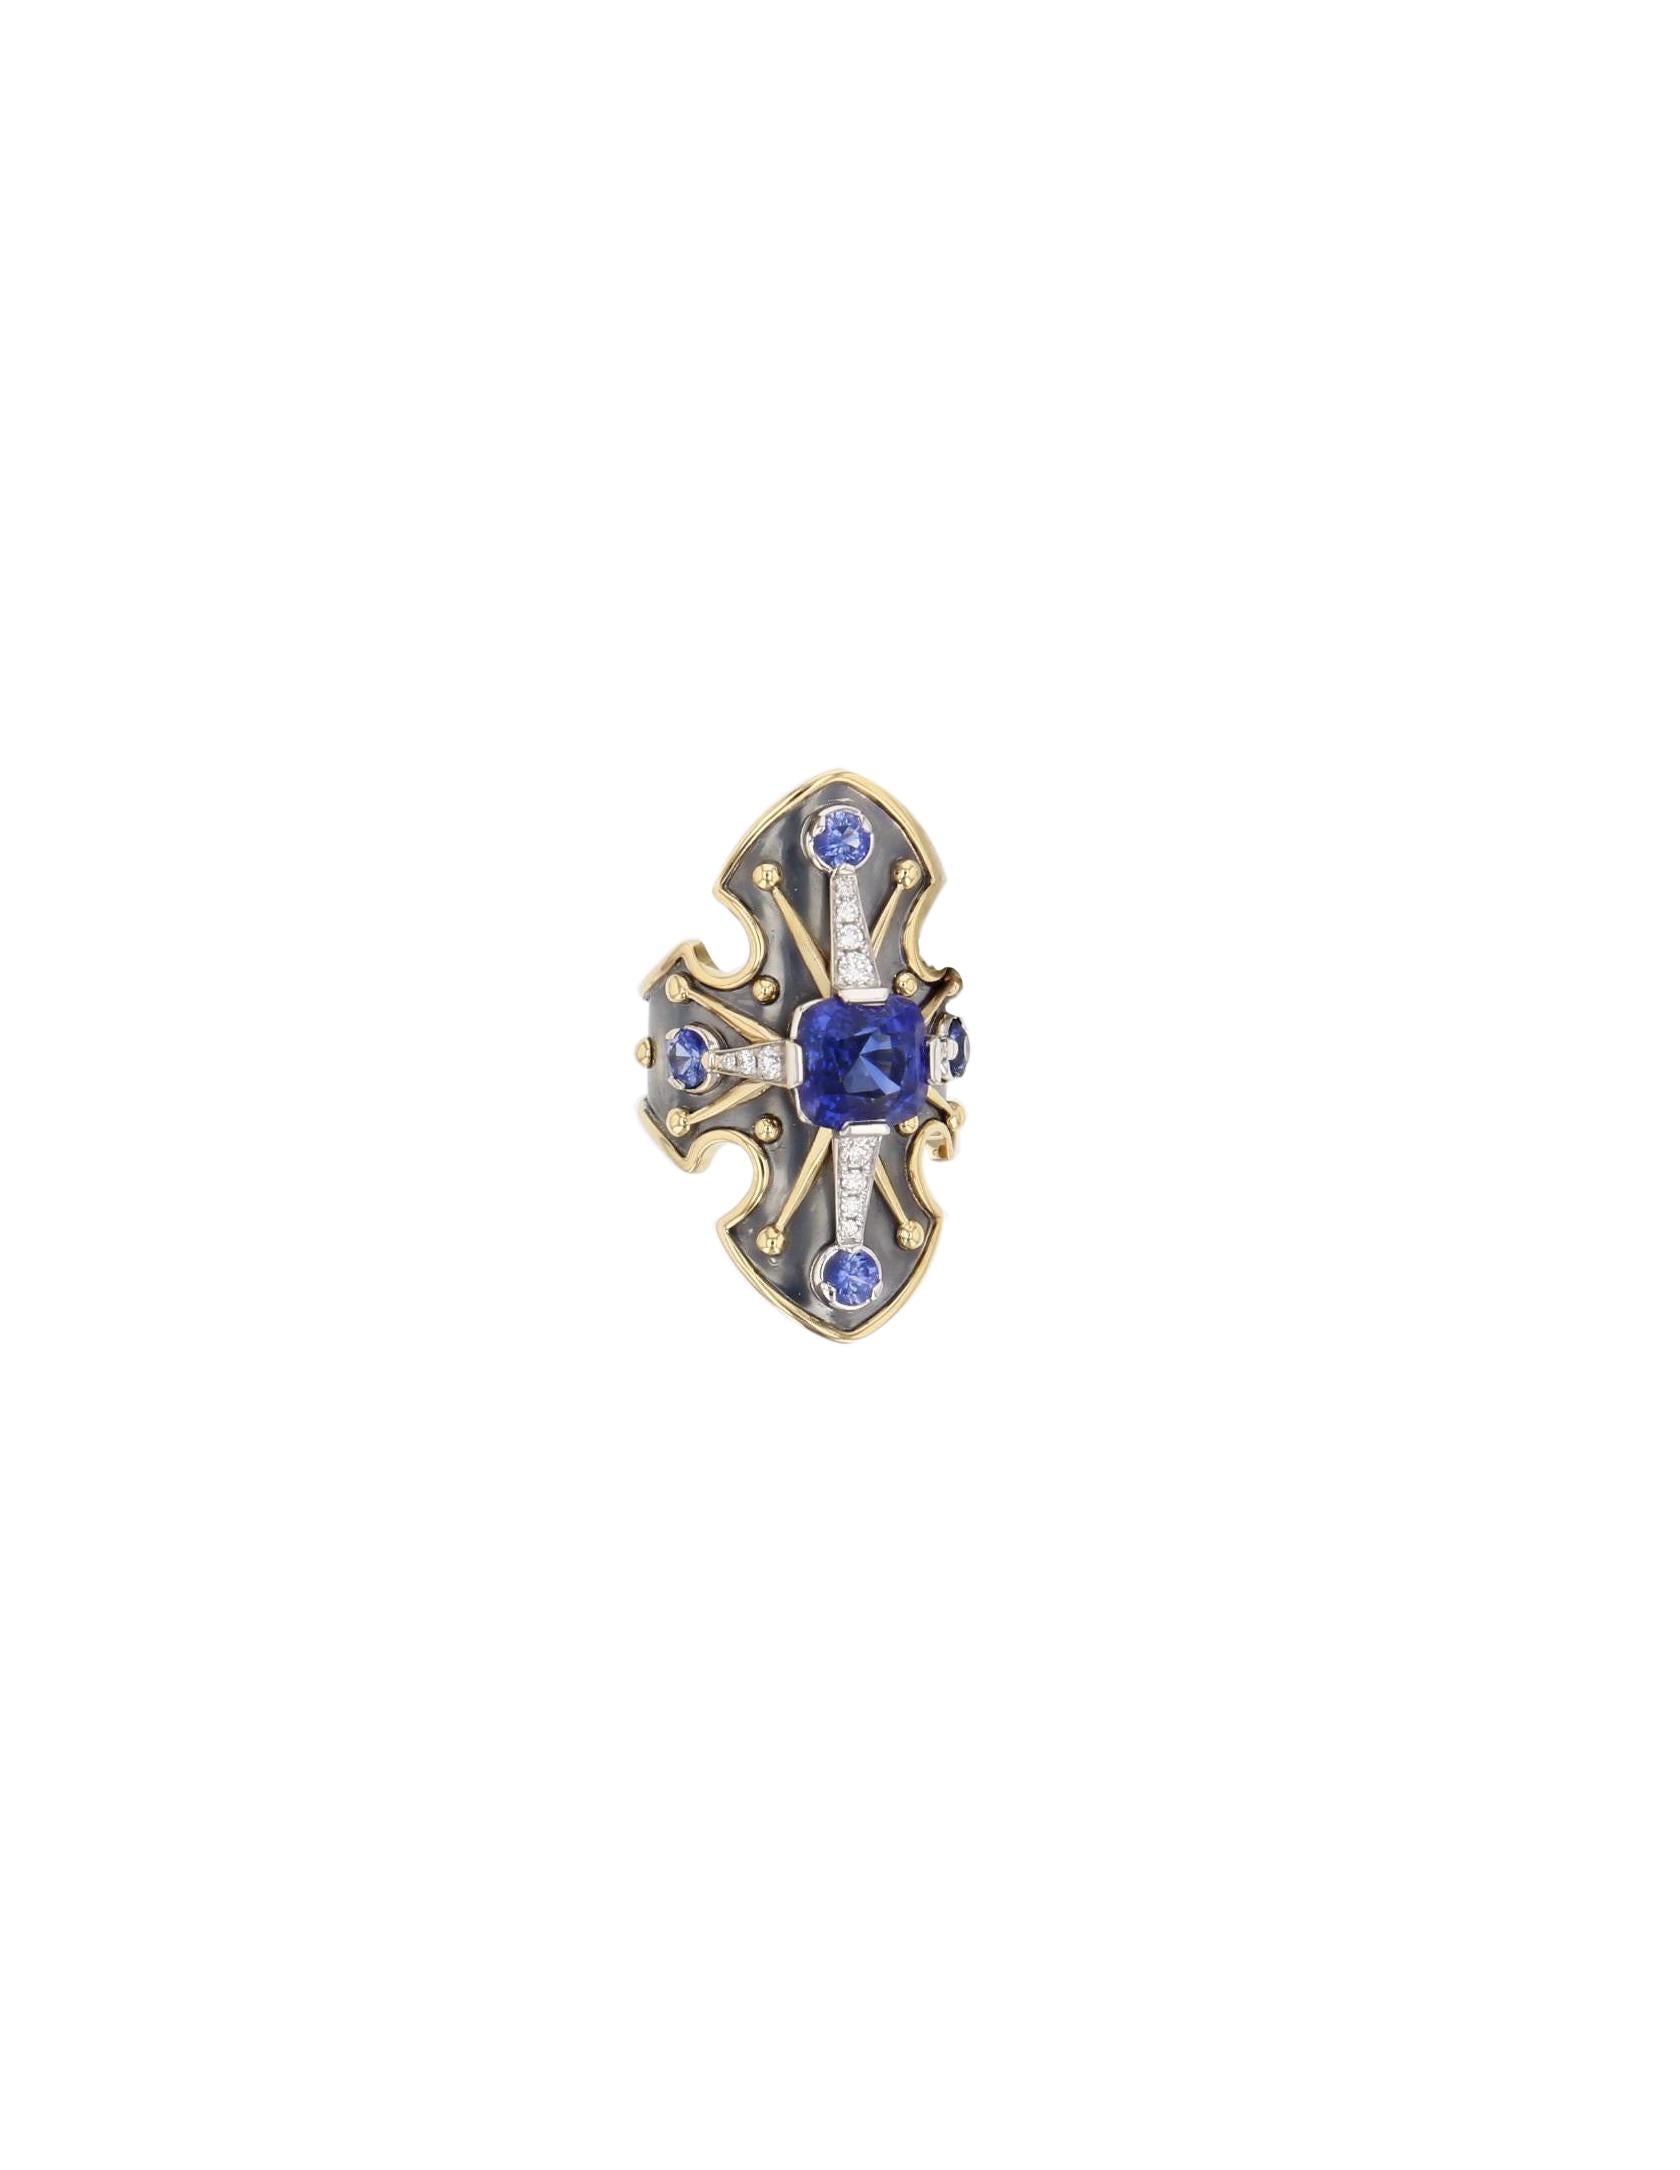 18K Yellow Gold and Distressed Silver Statement Shield Ring.
Encrusted with Diamonds (0.23 cts) and 5 blue sapphires including a central one of 4.04 cts

